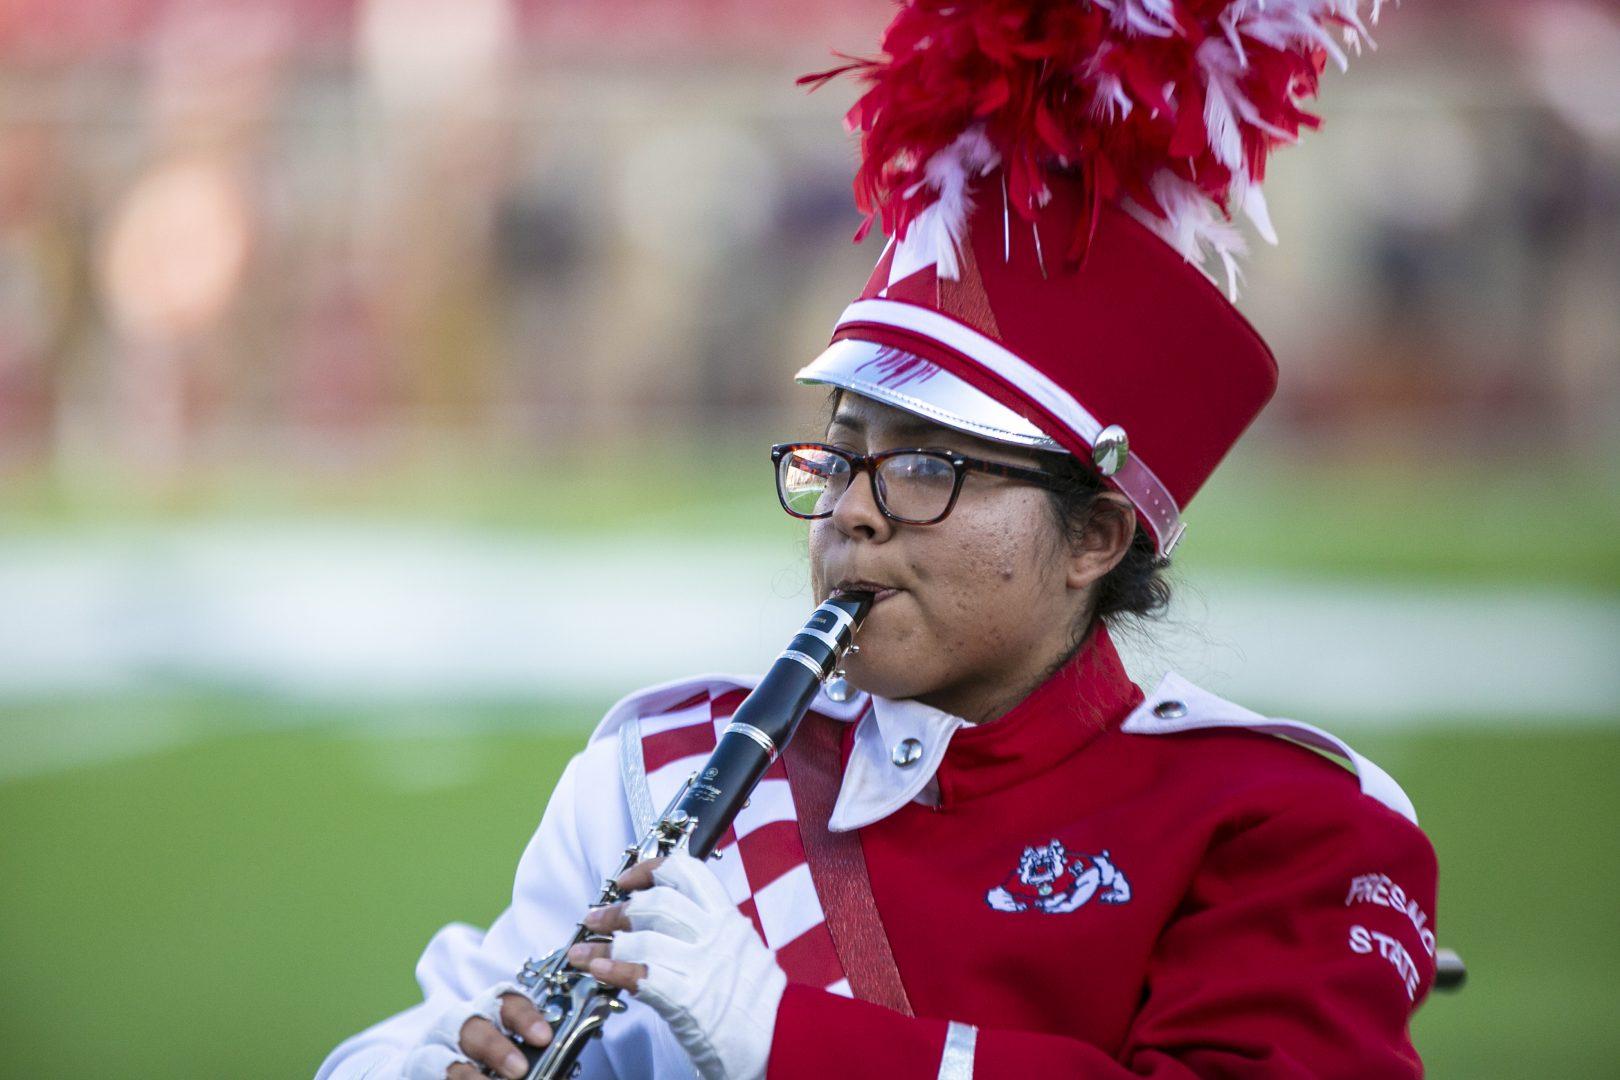 Viviana Reyes performs at the beginning of a Fresno State football game on Saturday, Nov. 9, 2019. (Larry Valenzuela/The Collegian)